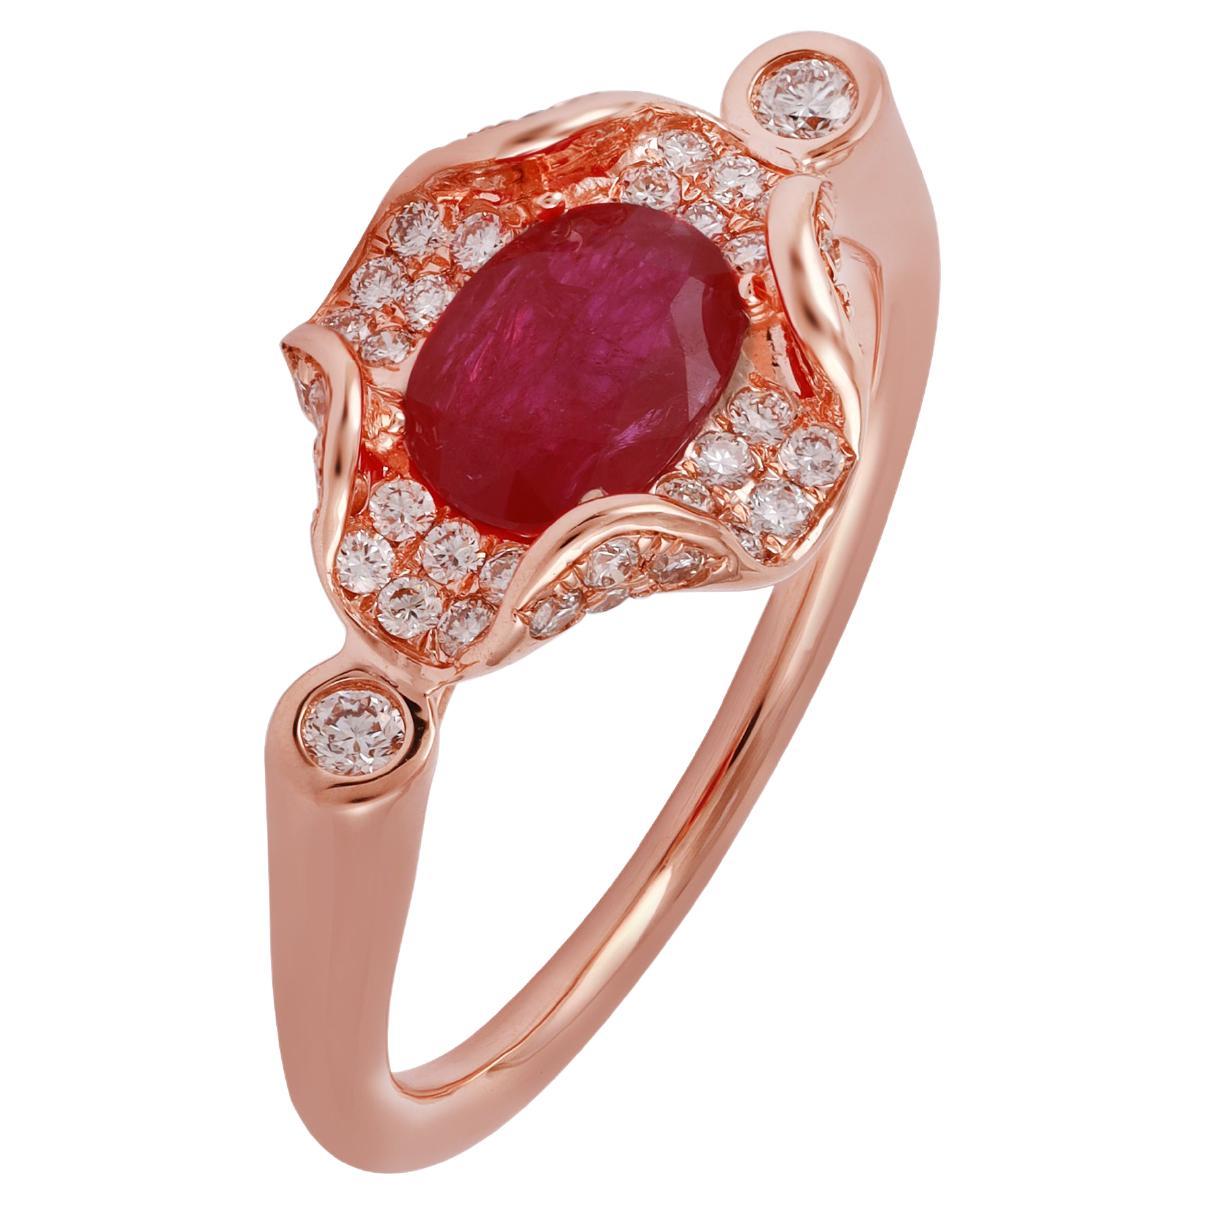 Eye Catching Mozambique Ruby Ring For Sale